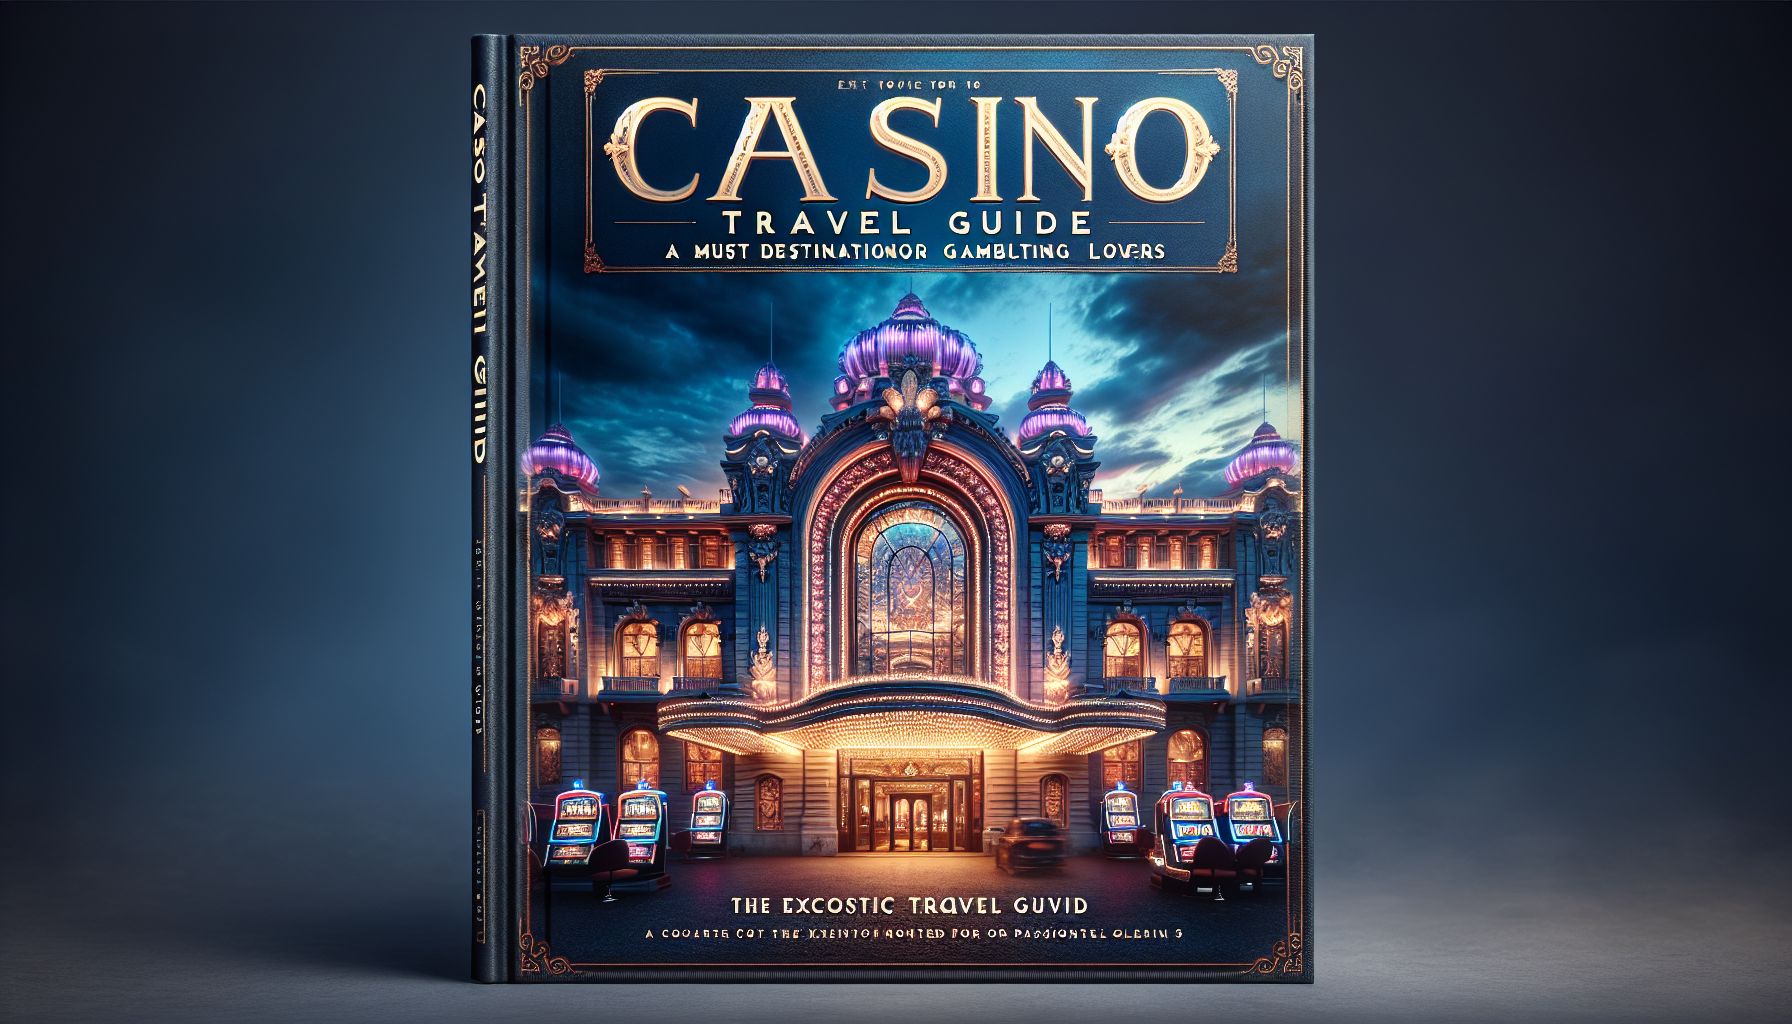 Casino Travel Guide: A Must Destination for Gambling Lovers